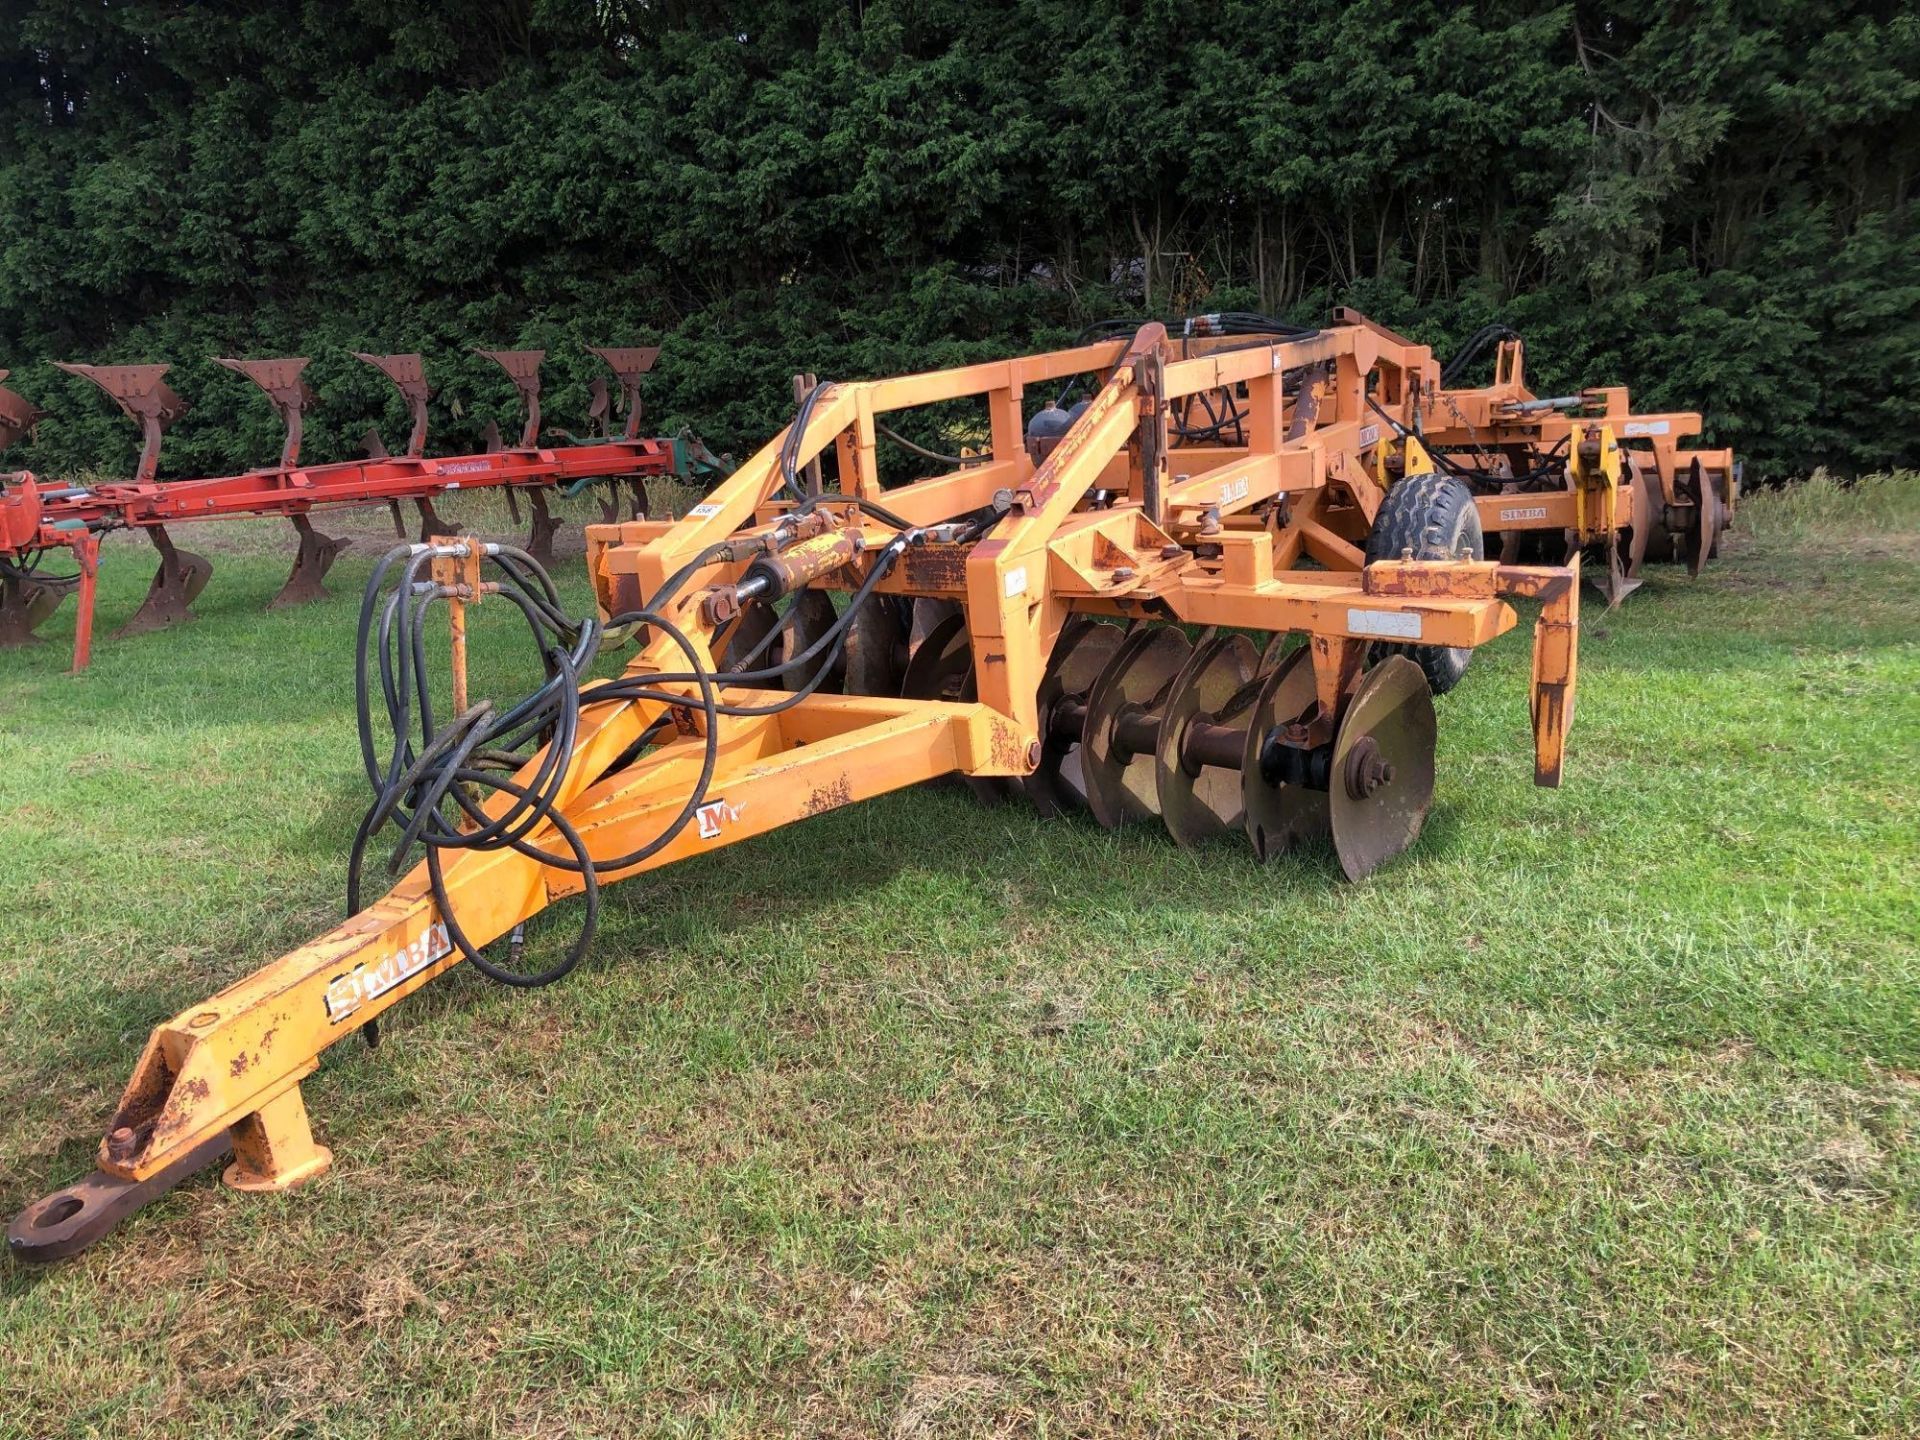 1996 Simba Mono trailed cultivator with front discs, 5 auto-reset subsoiler legs, rear discs and too